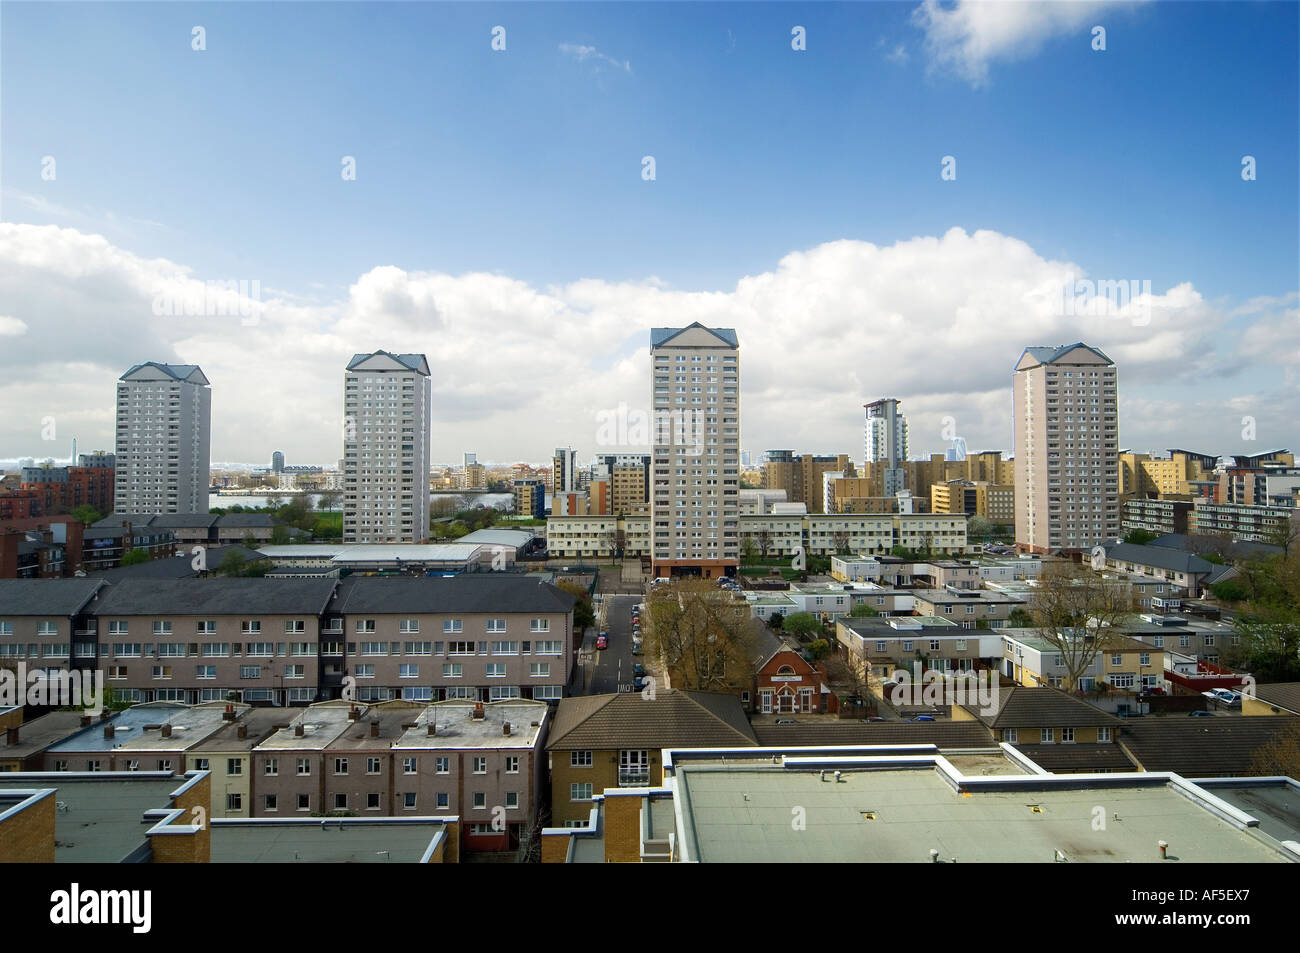 view of council flats isle of dogs london england uk Stock Photo